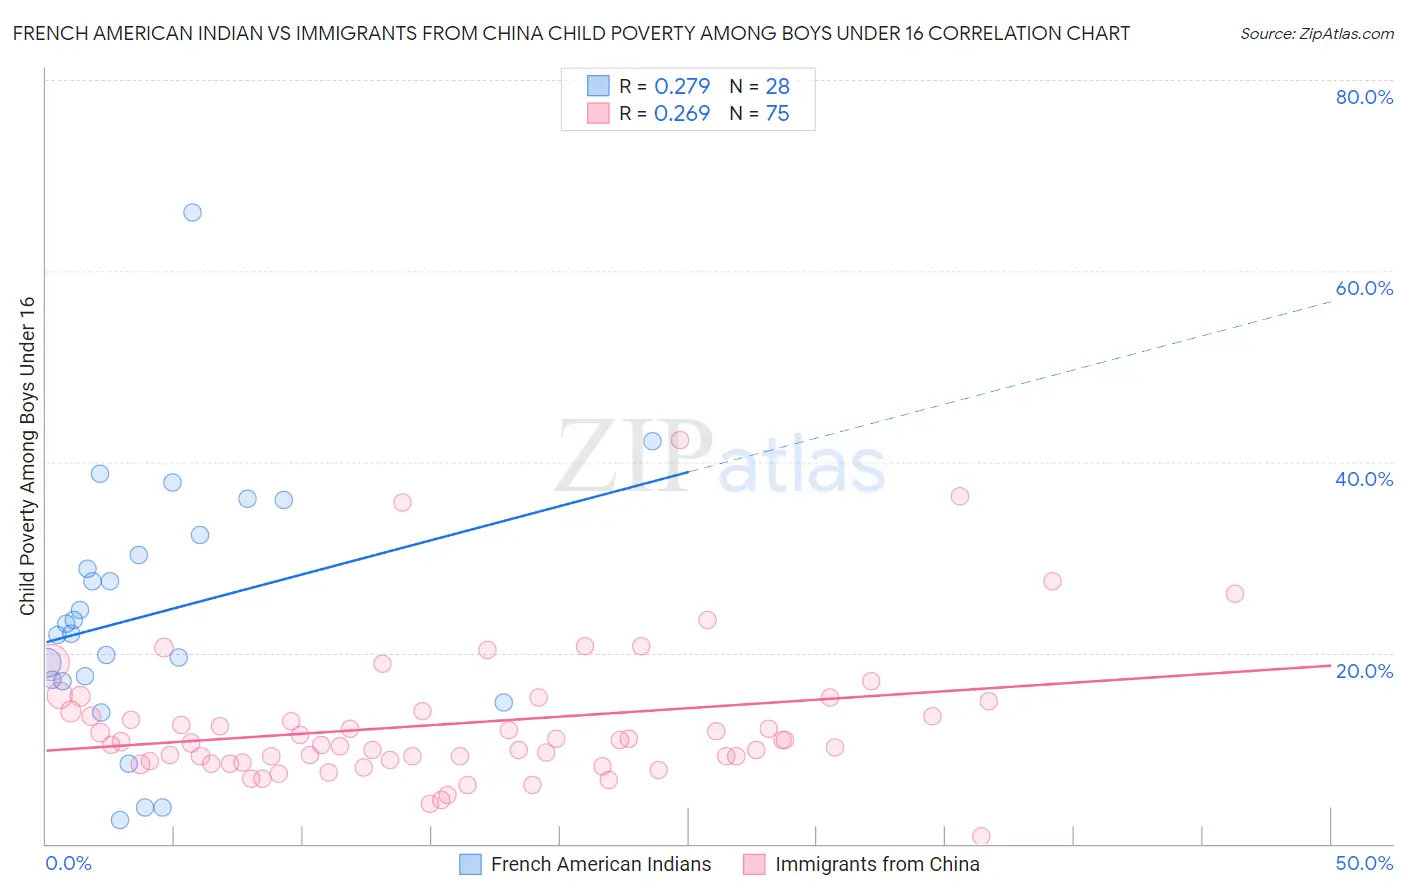 French American Indian vs Immigrants from China Child Poverty Among Boys Under 16